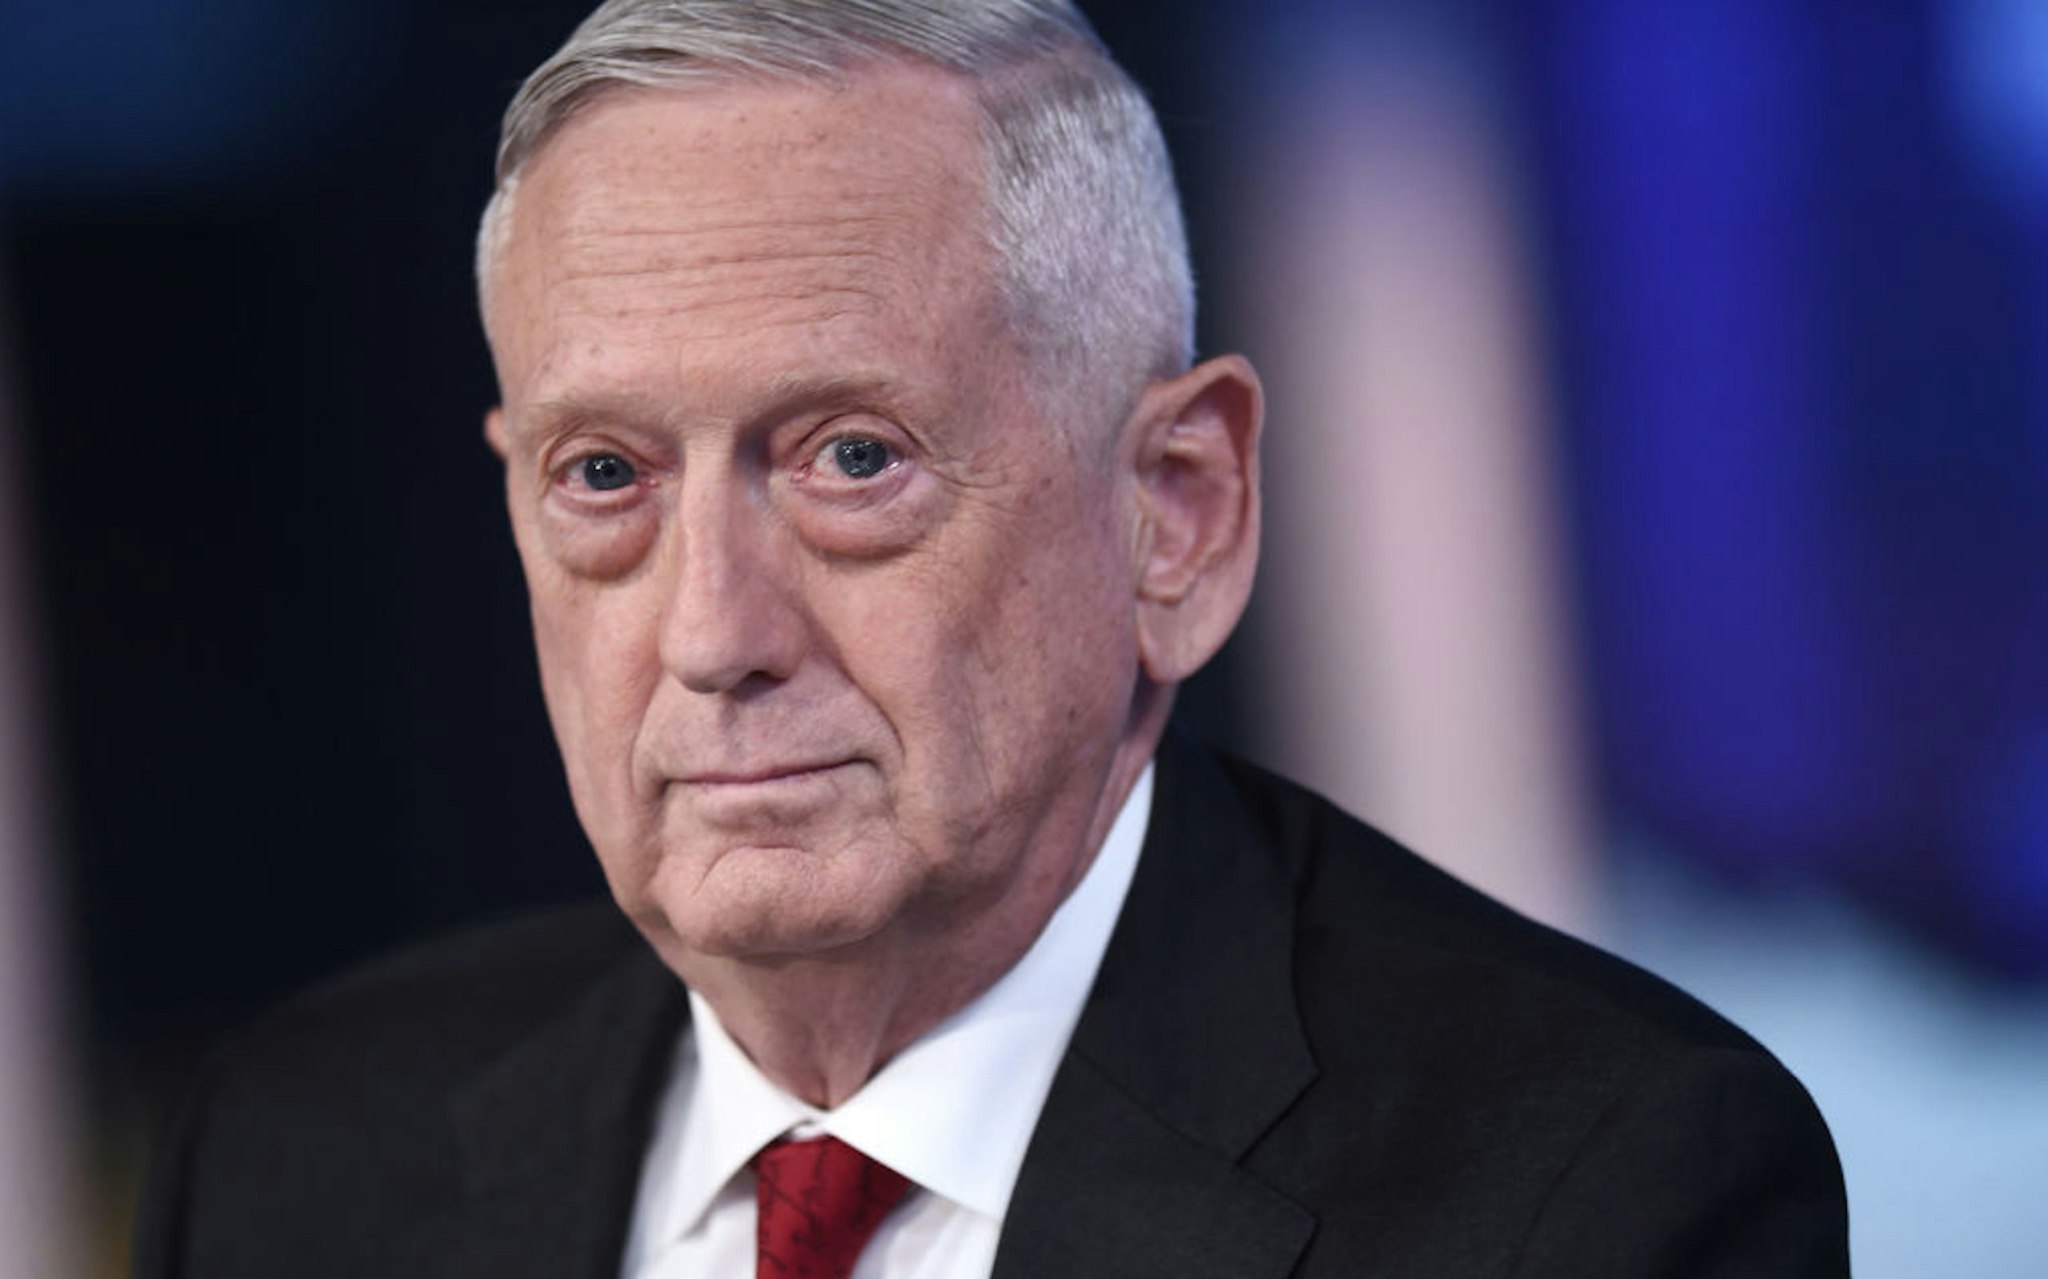 NEW YORK, NEW YORK - SEPTEMBER 03: (EXCLUSIVE COVERAGE) Former U.S. Secretary of Defense James Mattis visits FOX News Channel‚Äôs "The Story with Martha MacCallum" on September 03, 2019 in New York City.